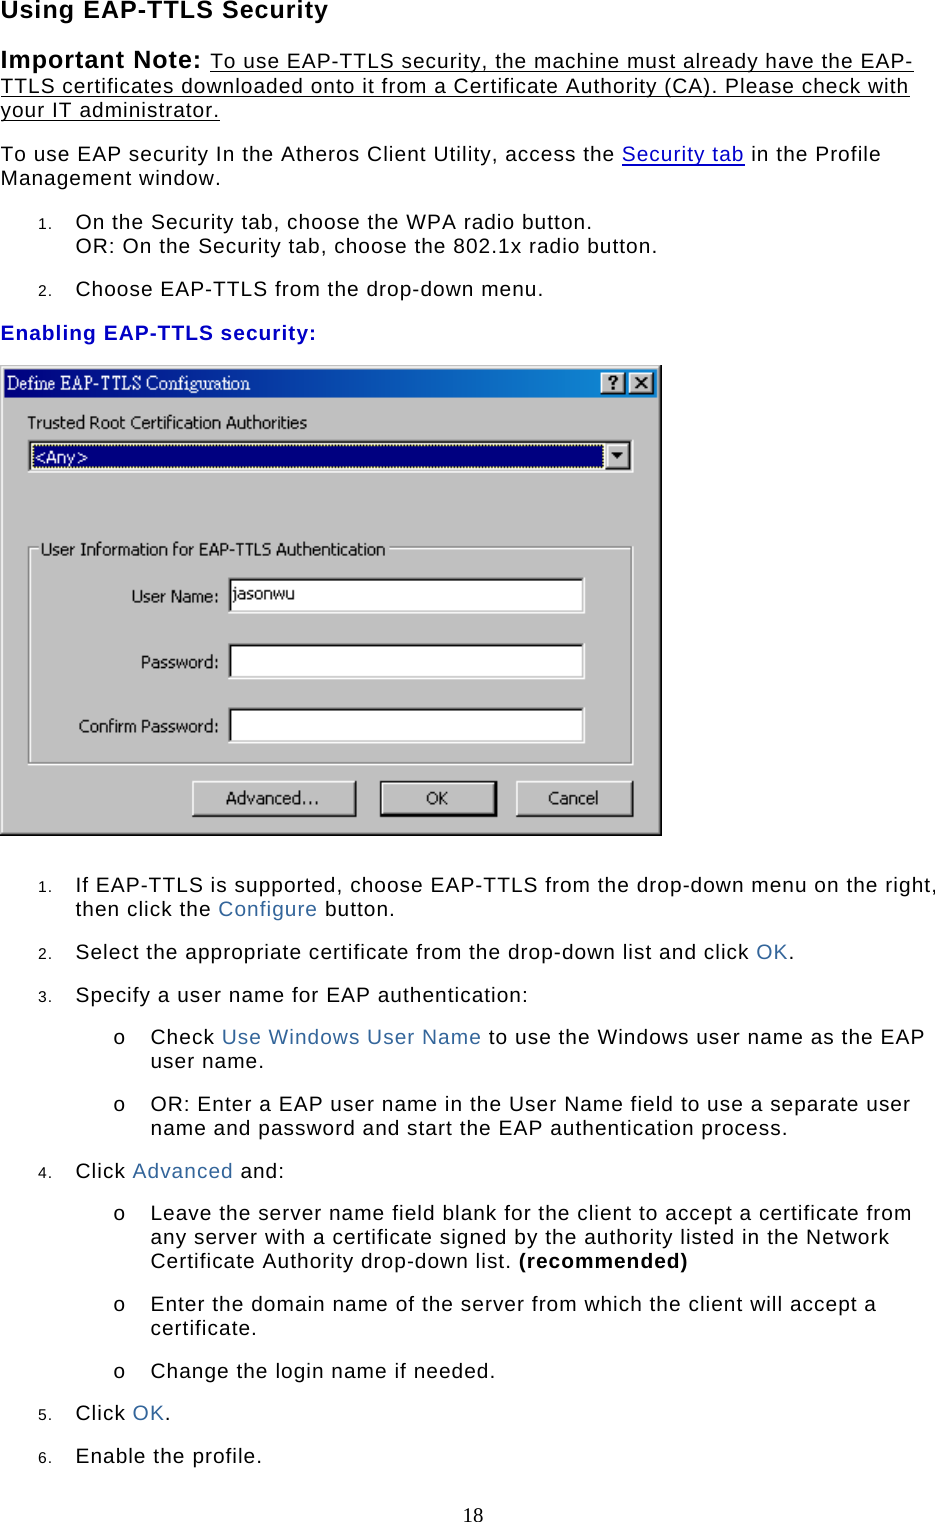  18 Using EAP-TTLS Security Important Note: To use EAP-TTLS security, the machine must already have the EAP-TTLS certificates downloaded onto it from a Certificate Authority (CA). Please check with your IT administrator. To use EAP security In the Atheros Client Utility, access the Security tab in the Profile Management window.  1.  On the Security tab, choose the WPA radio button.  OR: On the Security tab, choose the 802.1x radio button.   2.  Choose EAP-TTLS from the drop-down menu.  Enabling EAP-TTLS security:   1.  If EAP-TTLS is supported, choose EAP-TTLS from the drop-down menu on the right, then click the Configure button.  2.  Select the appropriate certificate from the drop-down list and click OK.  3.  Specify a user name for EAP authentication:  o  Check Use Windows User Name to use the Windows user name as the EAP user name.  o  OR: Enter a EAP user name in the User Name field to use a separate user name and password and start the EAP authentication process.  4.  Click Advanced and:  o  Leave the server name field blank for the client to accept a certificate from any server with a certificate signed by the authority listed in the Network Certificate Authority drop-down list. (recommended)  o  Enter the domain name of the server from which the client will accept a certificate.   o  Change the login name if needed.  5.  Click OK.  6.  Enable the profile.  